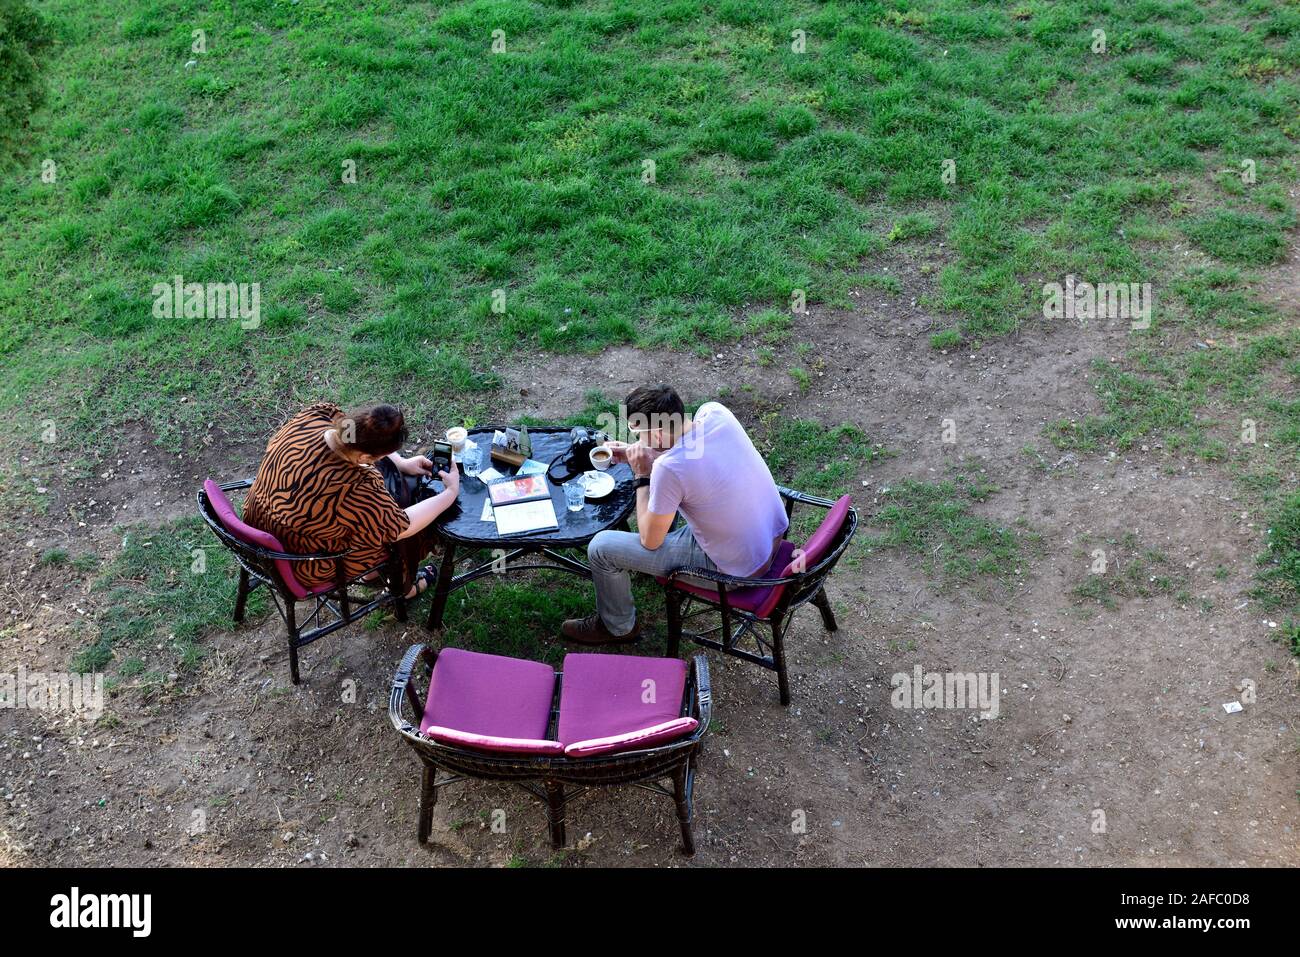 Looking from above at two people eating outside in park at table. She using phone to photograph coffee cup, Rovinj, Croatia Stock Photo